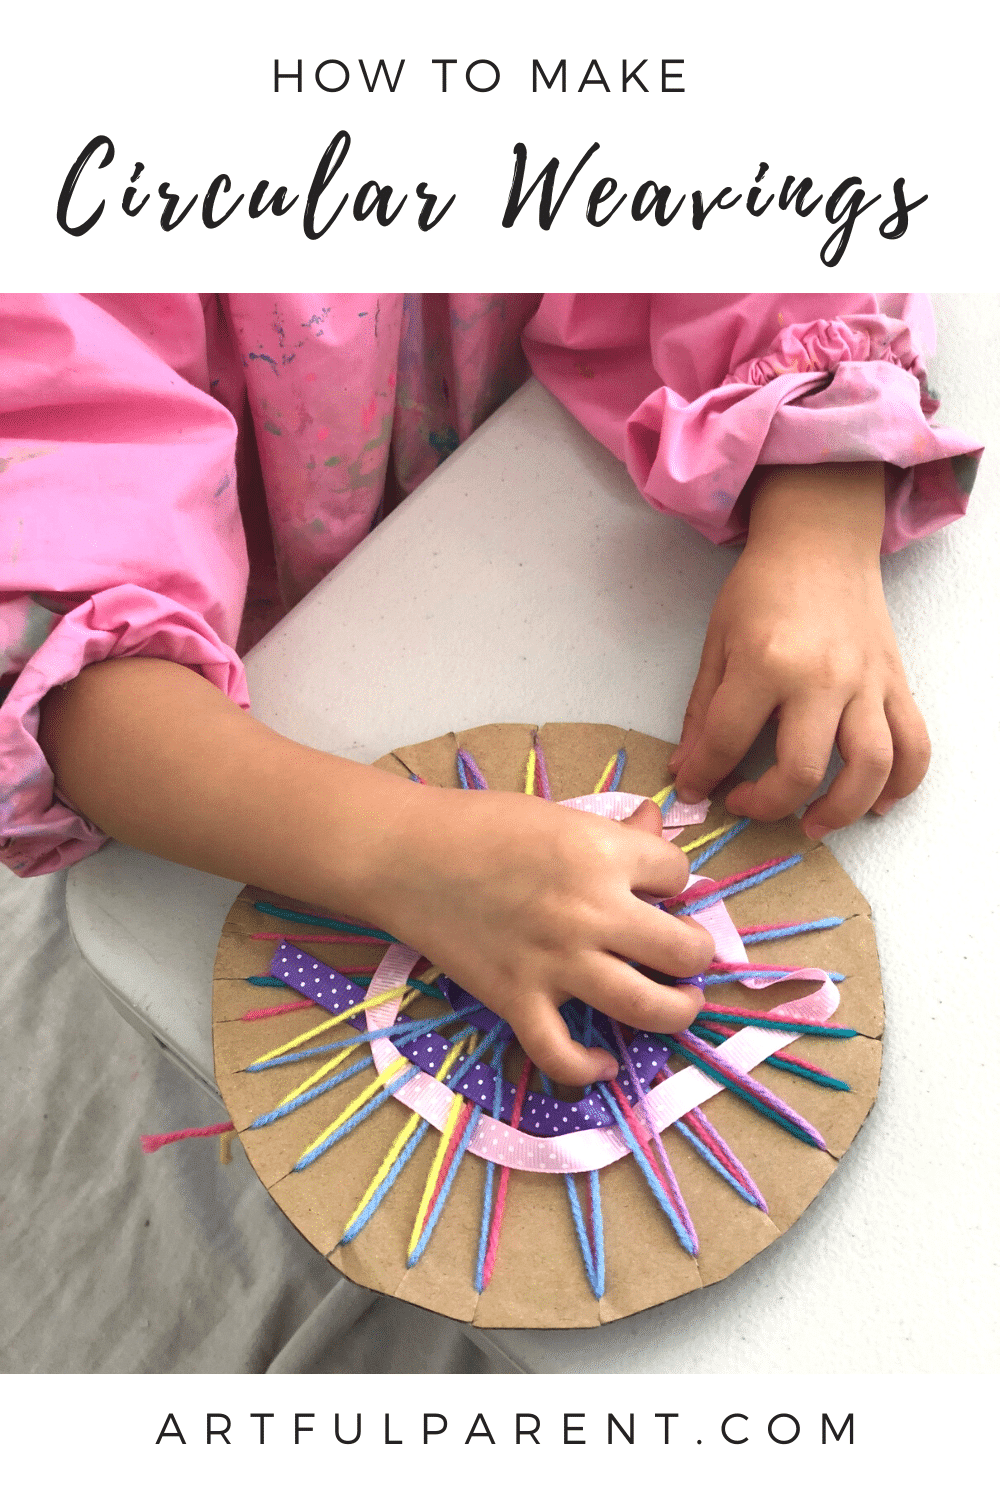 How to Make a Circular Weaving for Kids